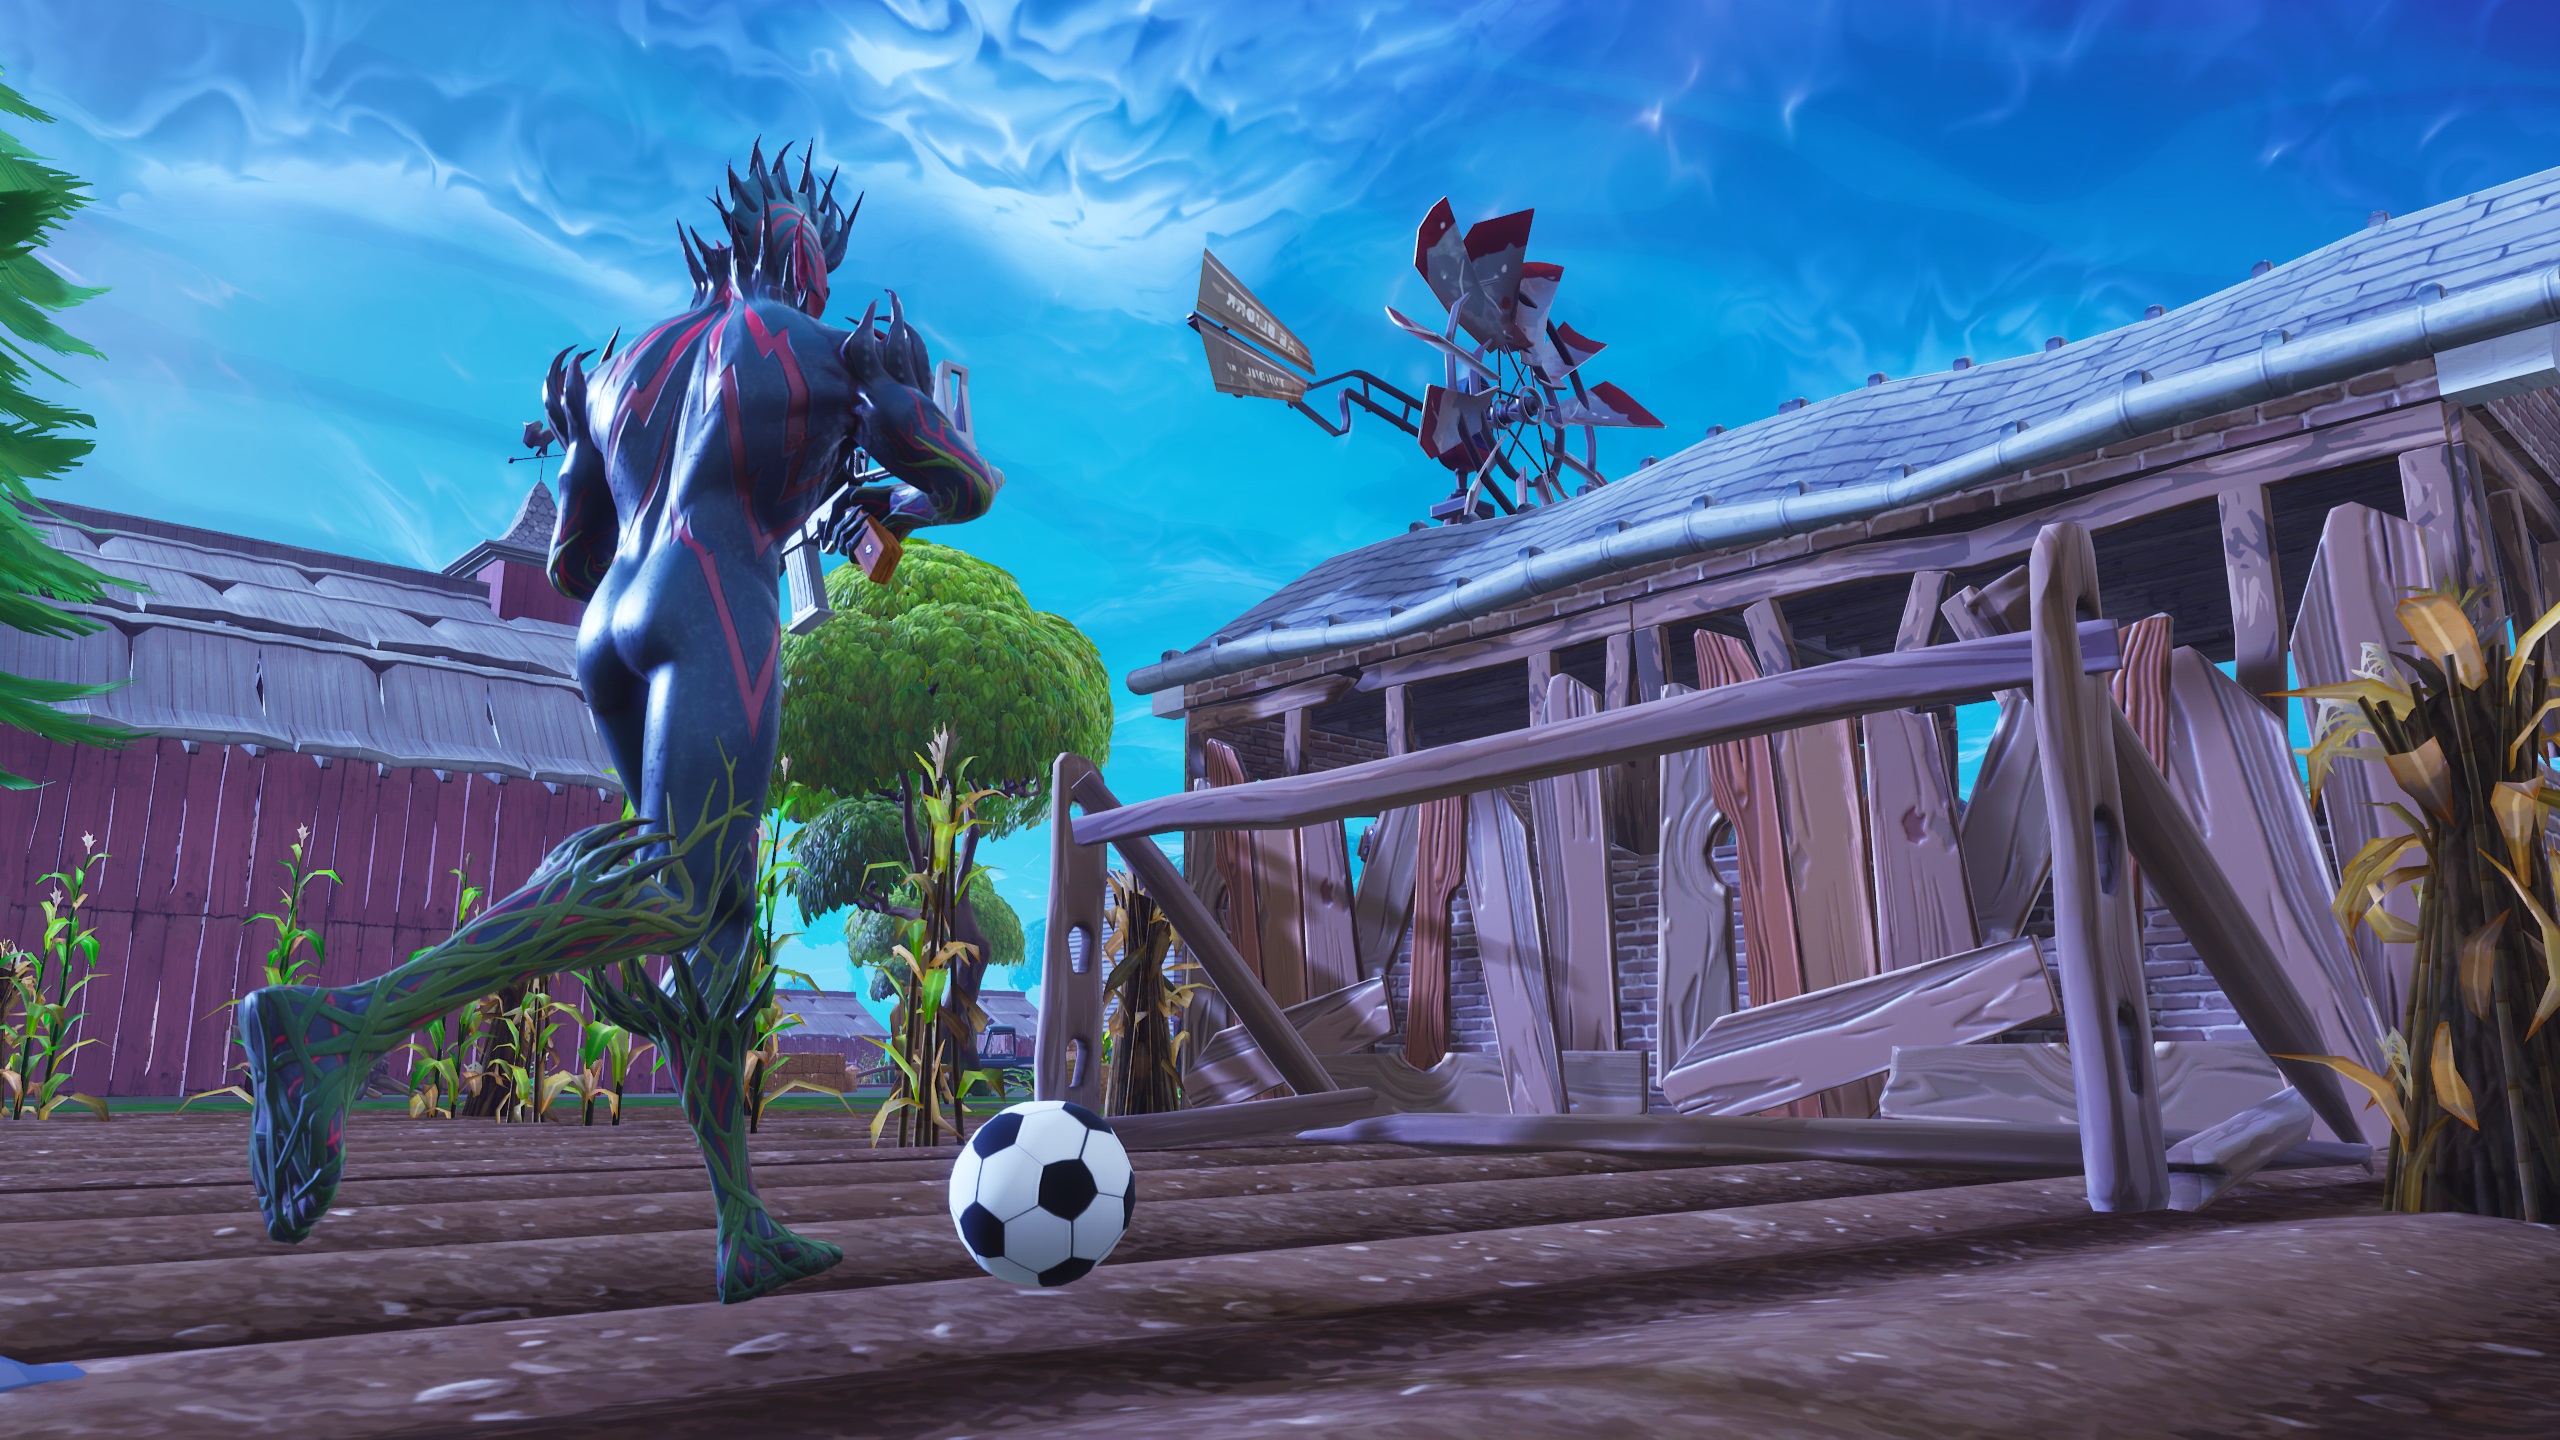 fortnite s playground ltm ends in a week epic teases plans for the next one pc gamer - how to access playground ltm fortnite